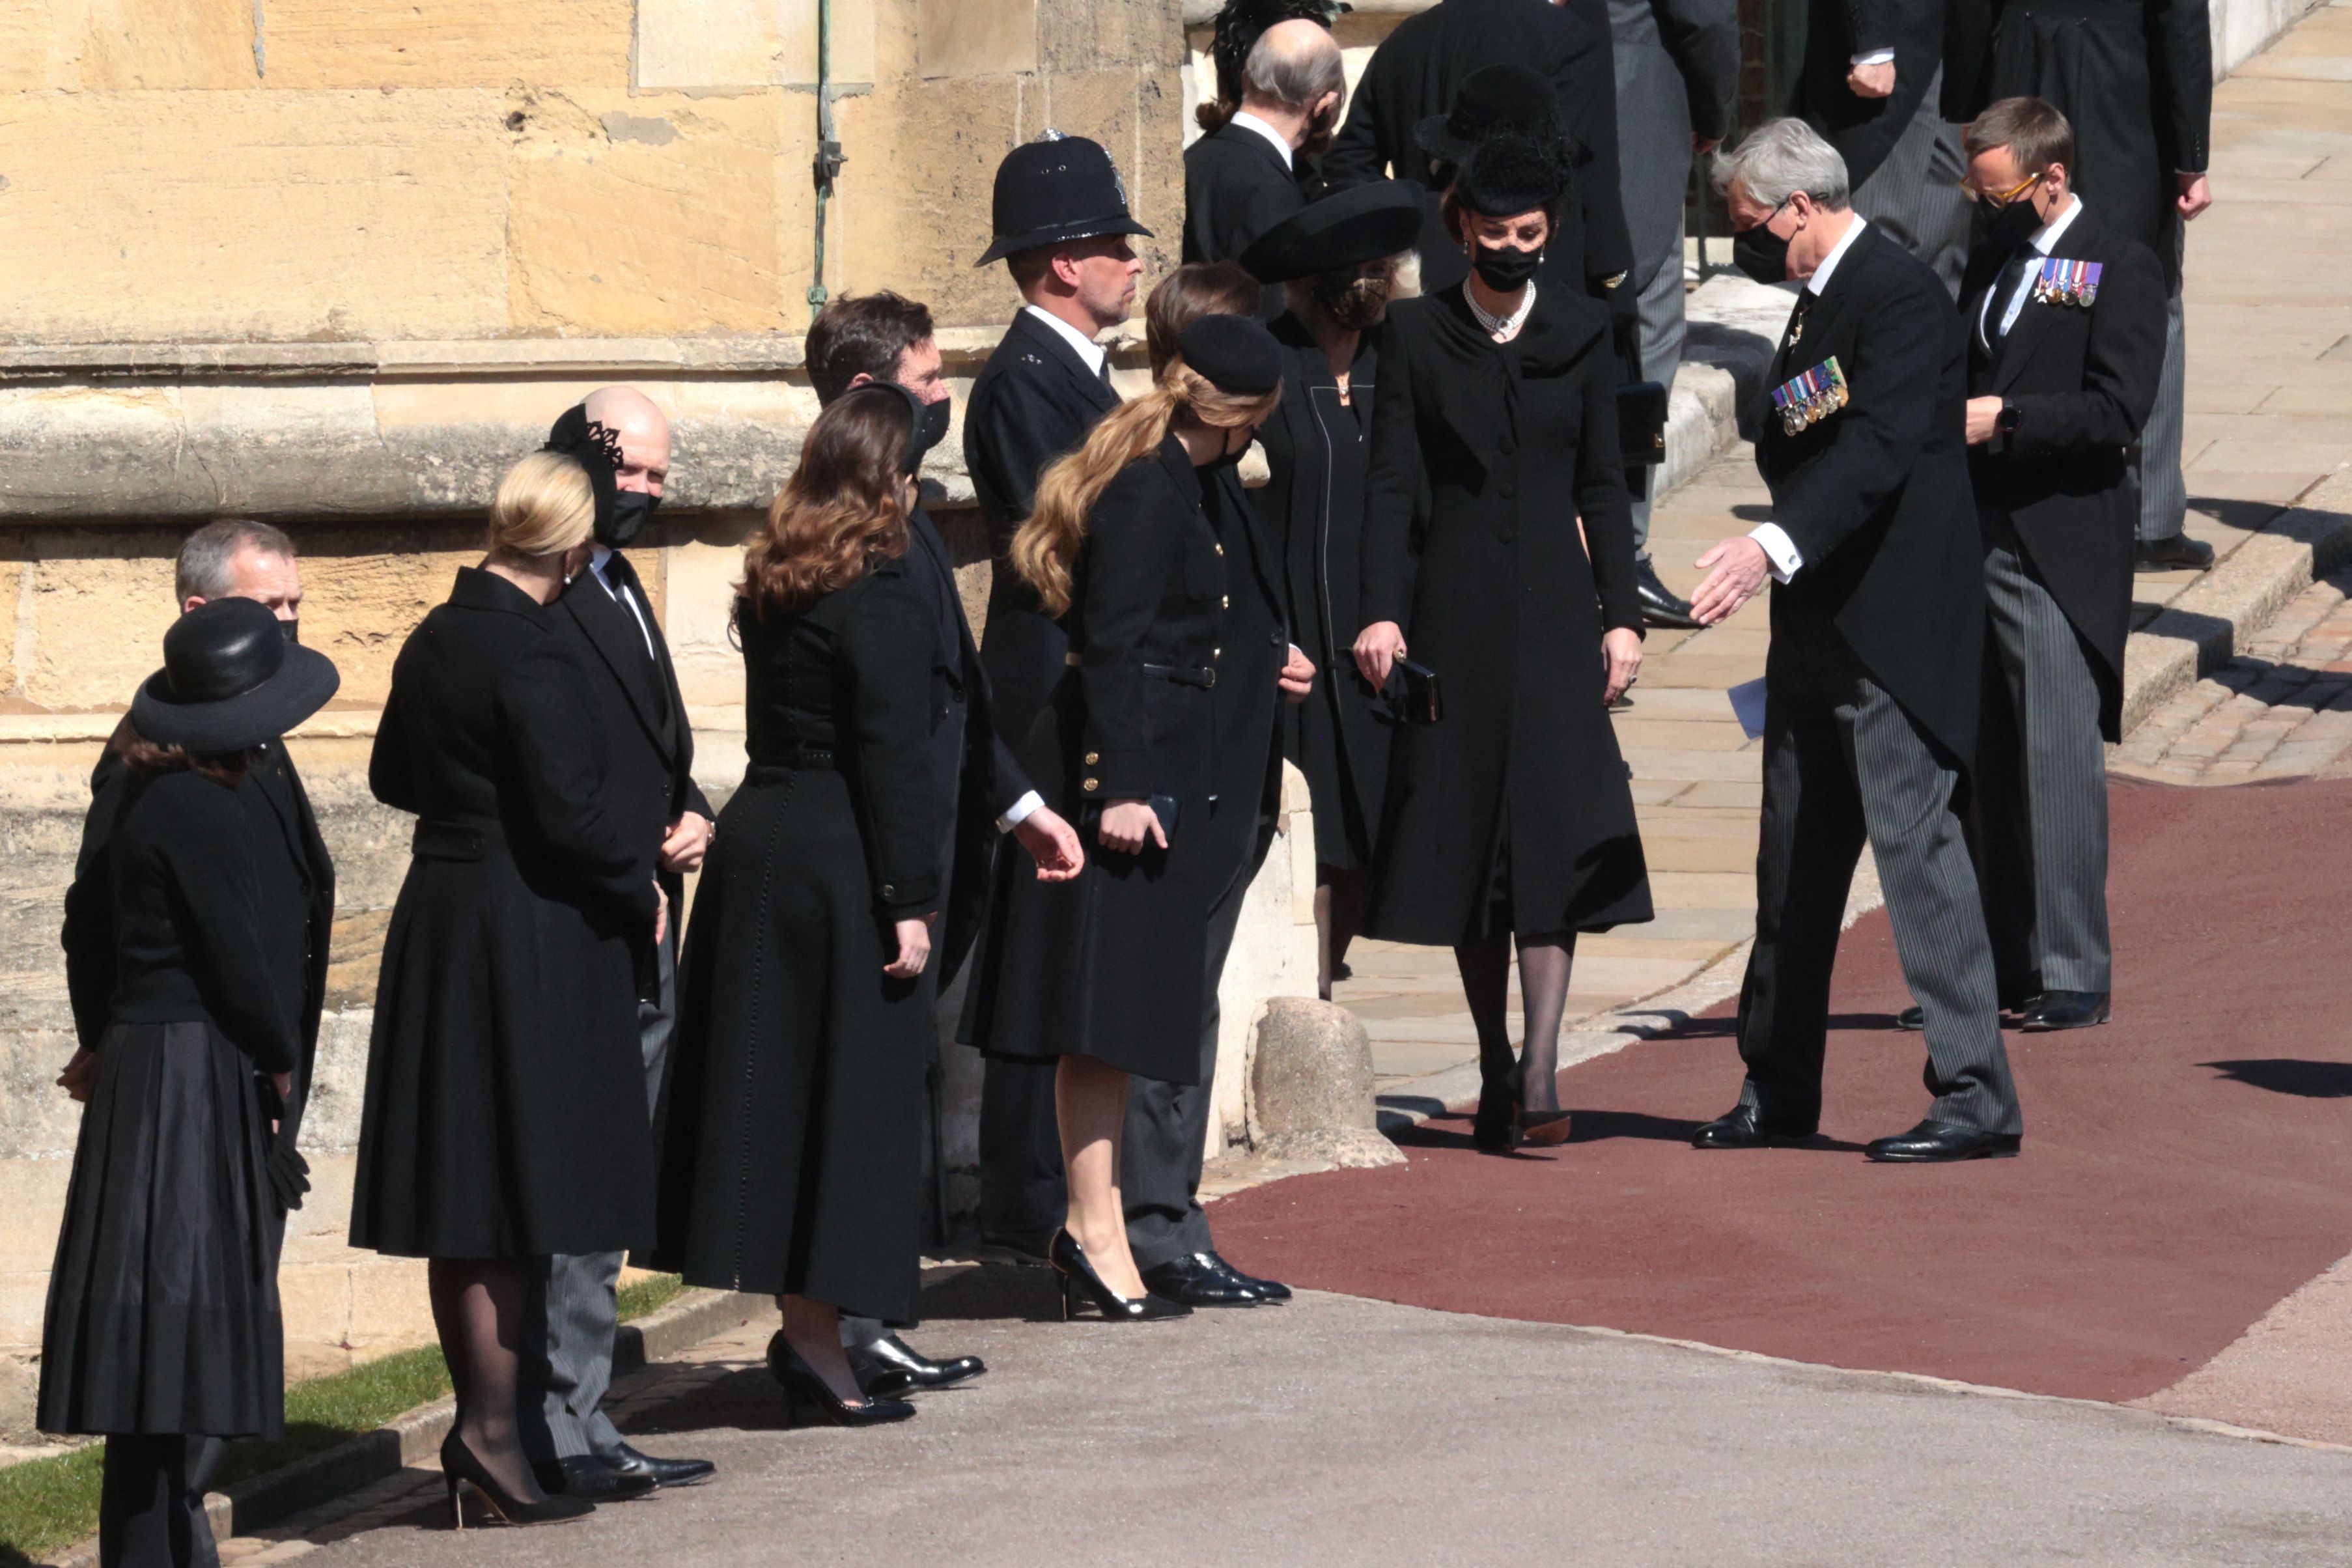 Picture of members of the royal family wearing all black and standing in line